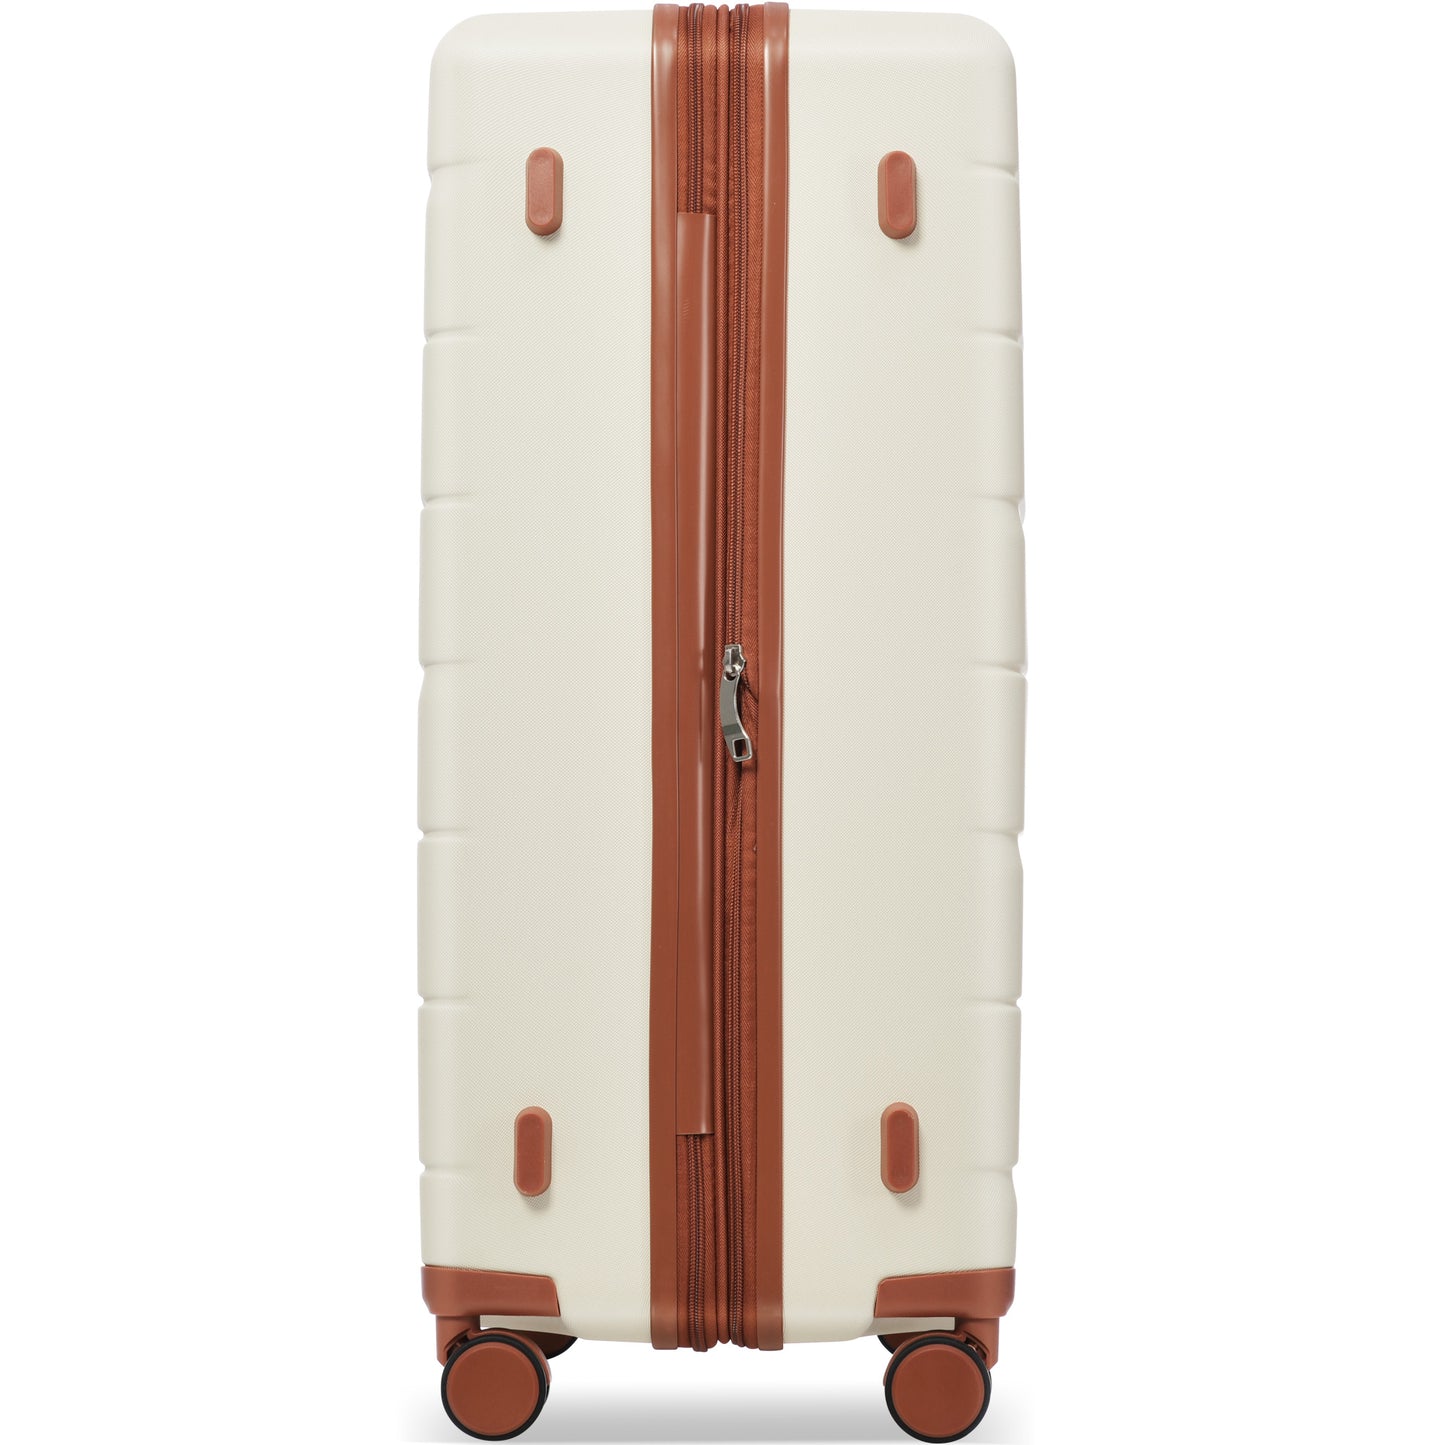 Luggage Sets 3 Piece Suitcase Set 20/24/28 Carry on Luggage Airline Approved Hard Case with Spinner Wheels Beige and Brown